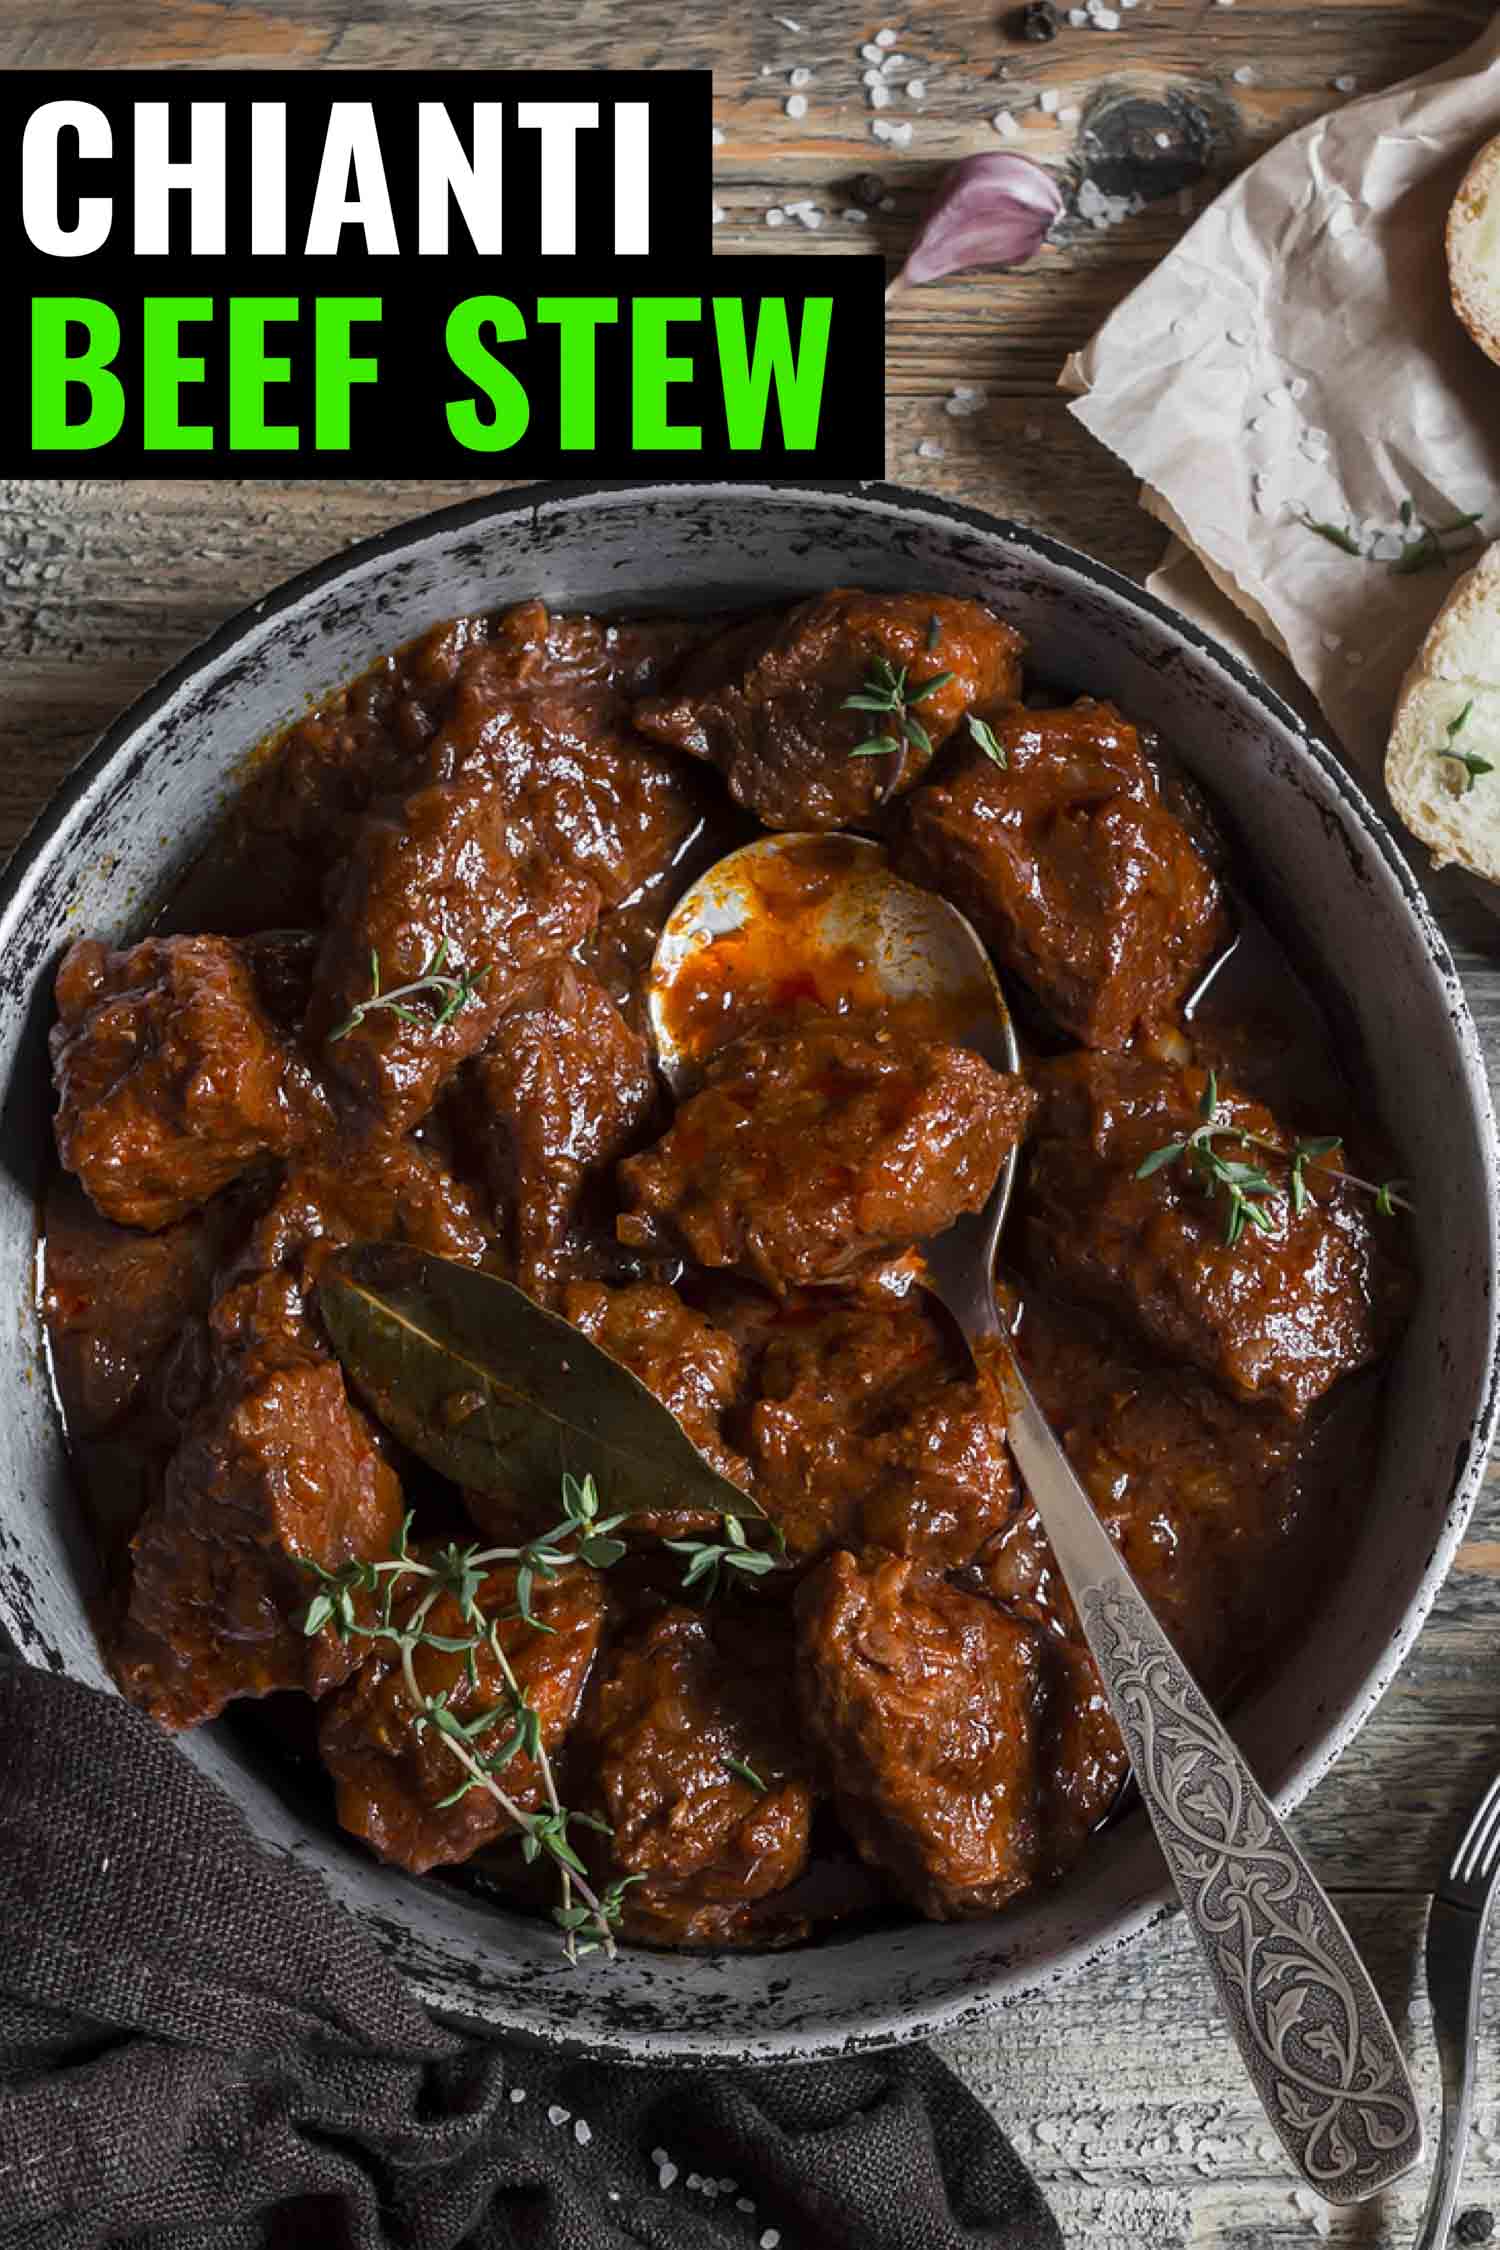 Chianti beef stew, beef braised in red wine in a rustic looking pot on a grey background